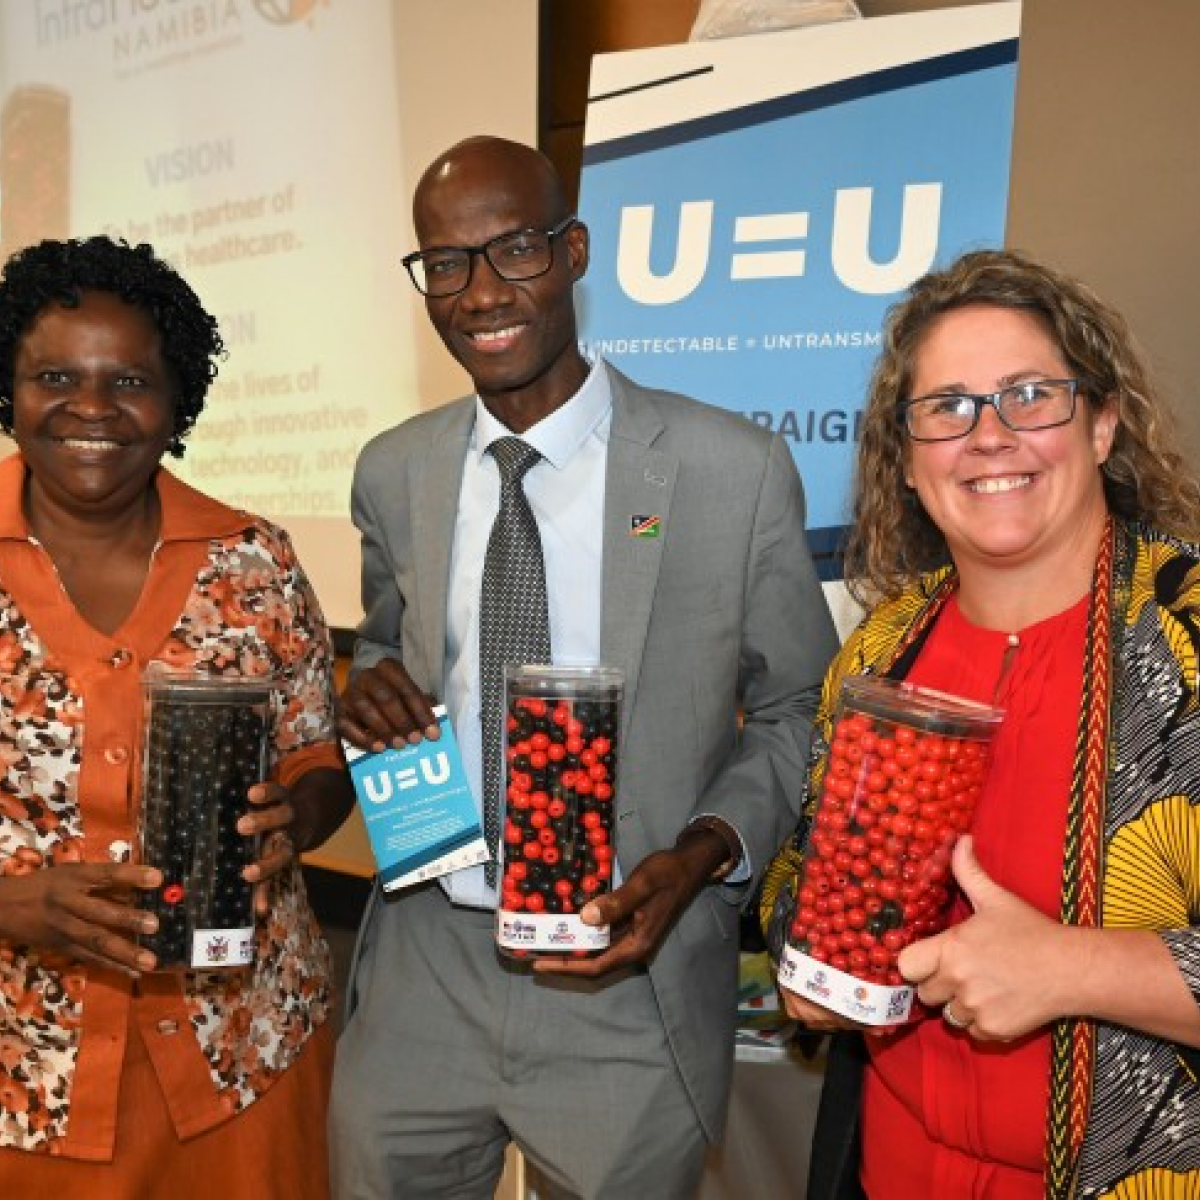 UNAIDS Namibia Director Dr. Alti Zwandor, Acting Health Ministry ED Jeremia Nghipundjwa and Acting USAID Namibia Representative Laura Muzart showcasing outreach tools that explain the meaning of “Undetectable = Untransmittable.”